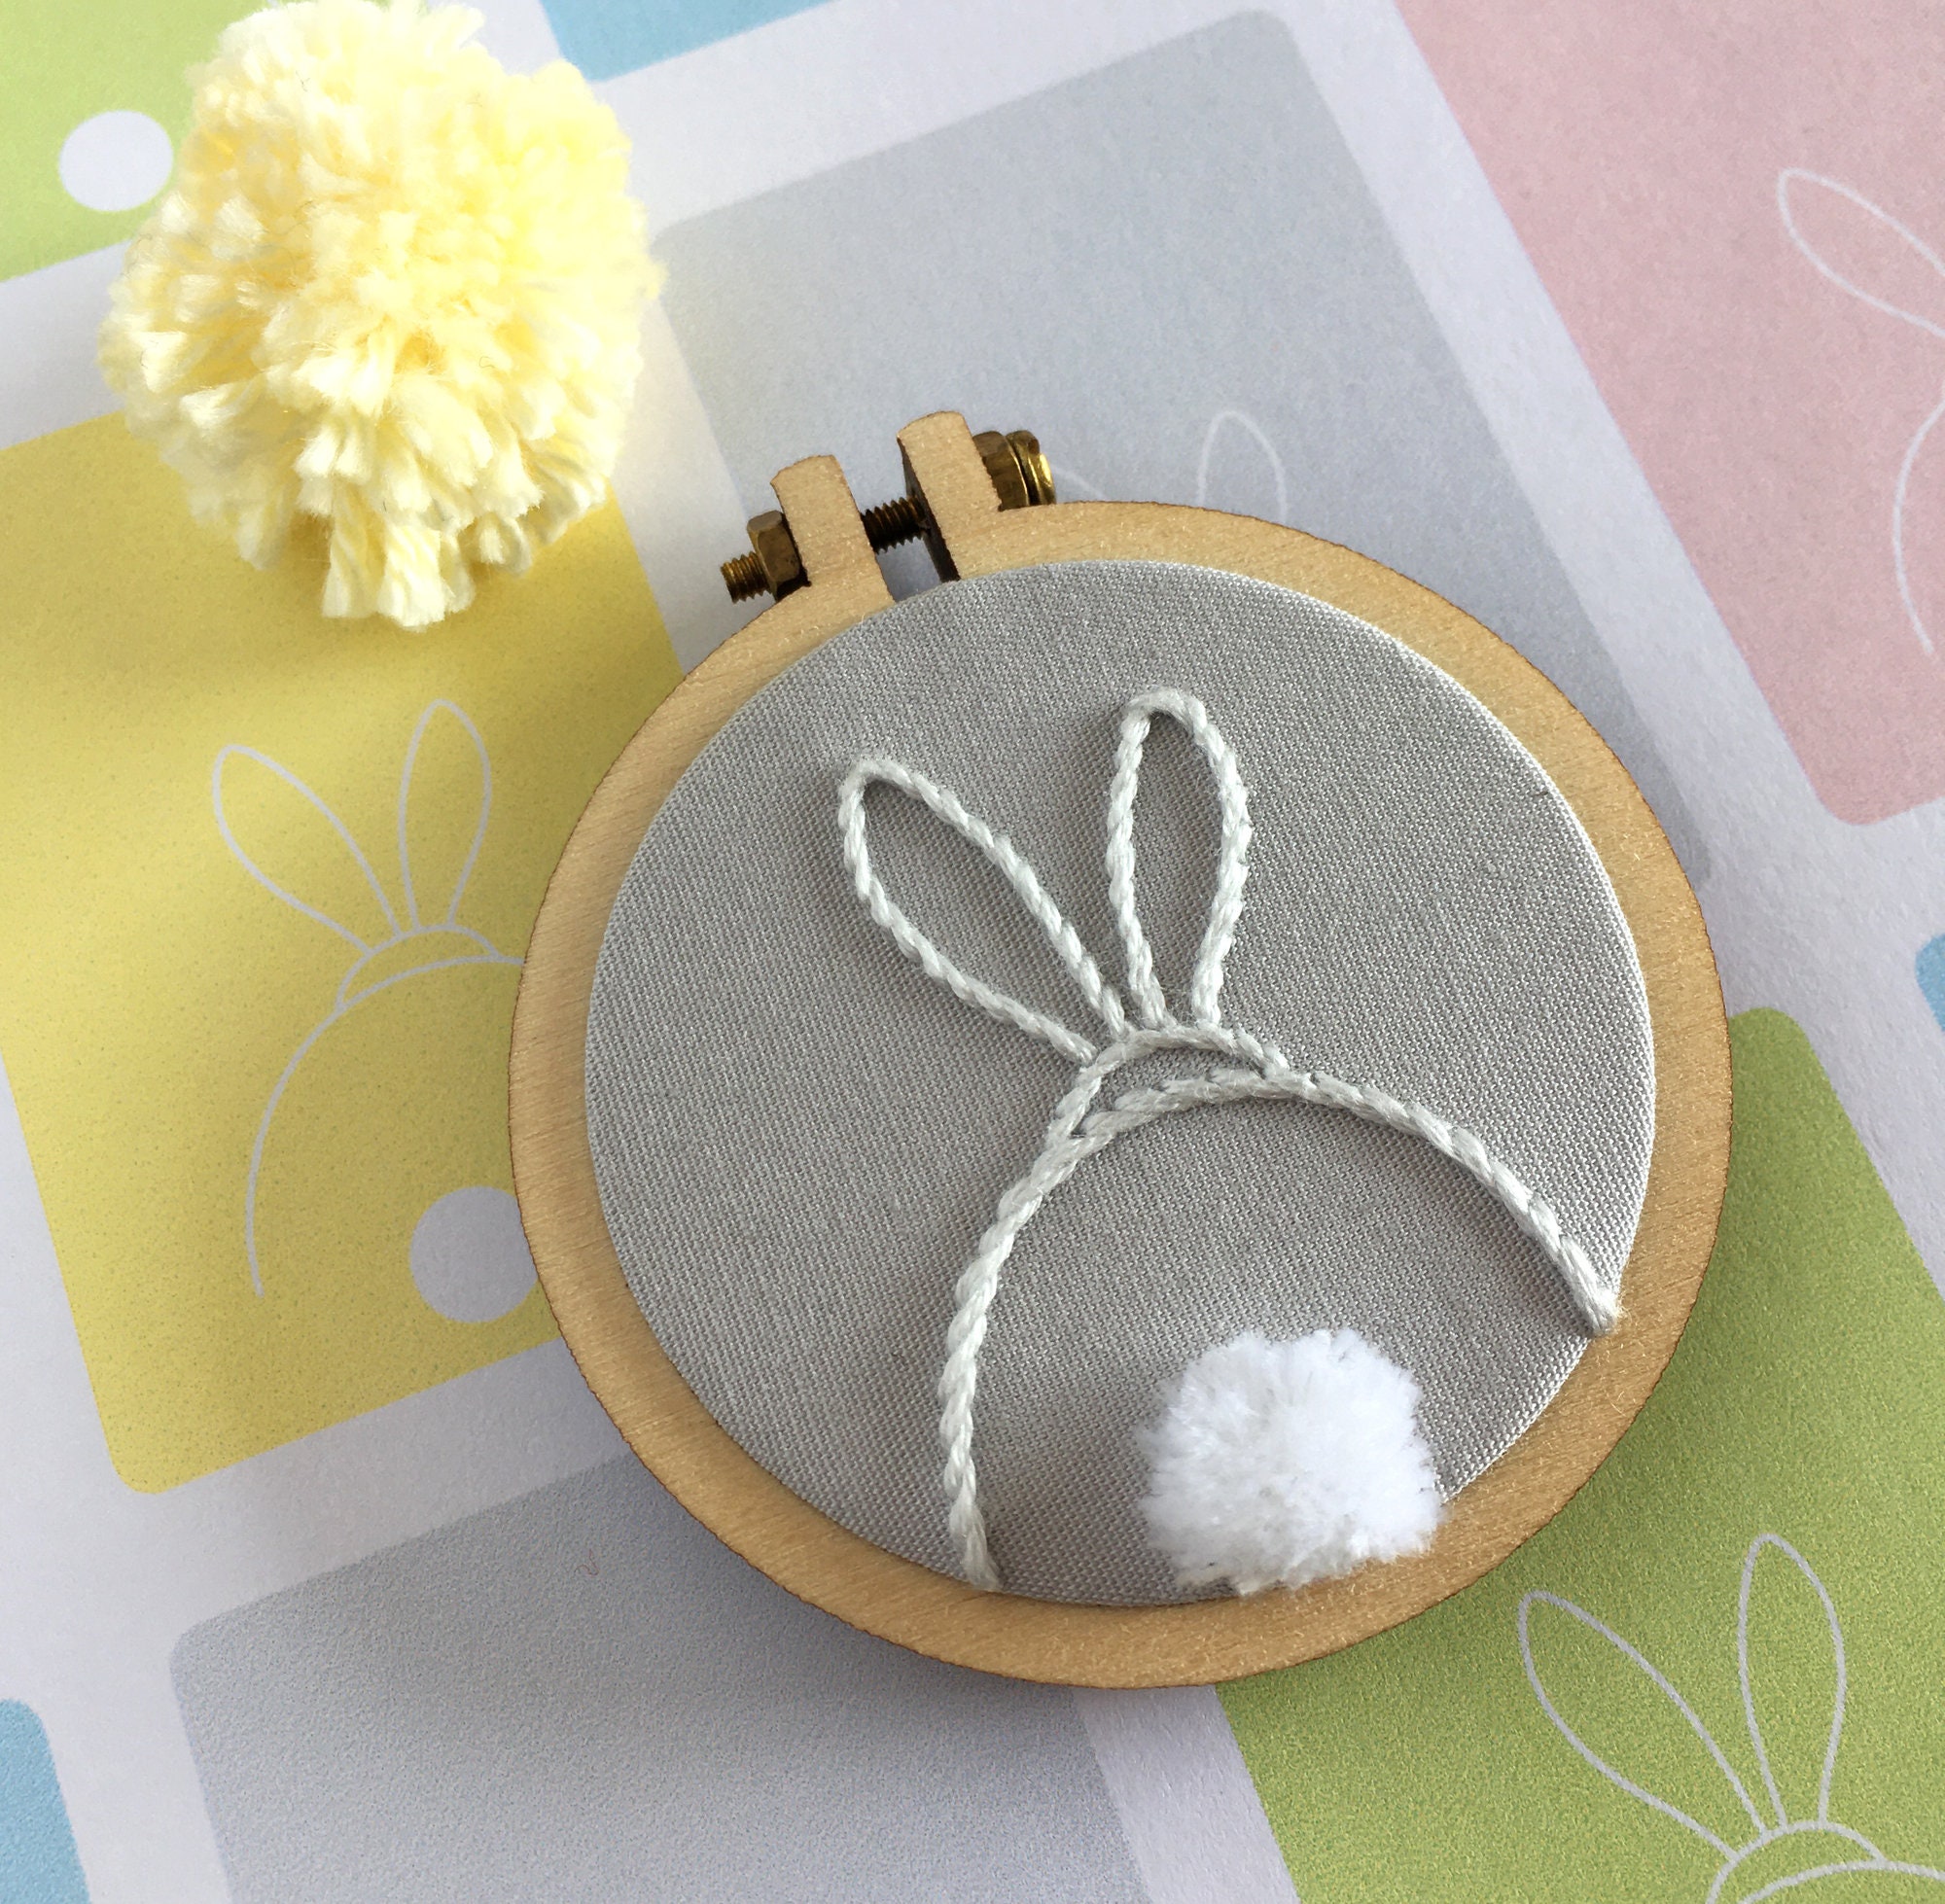 Shy Rabbit Hand Embroidery Pattern a Modern Embroidery PDF | Etsy